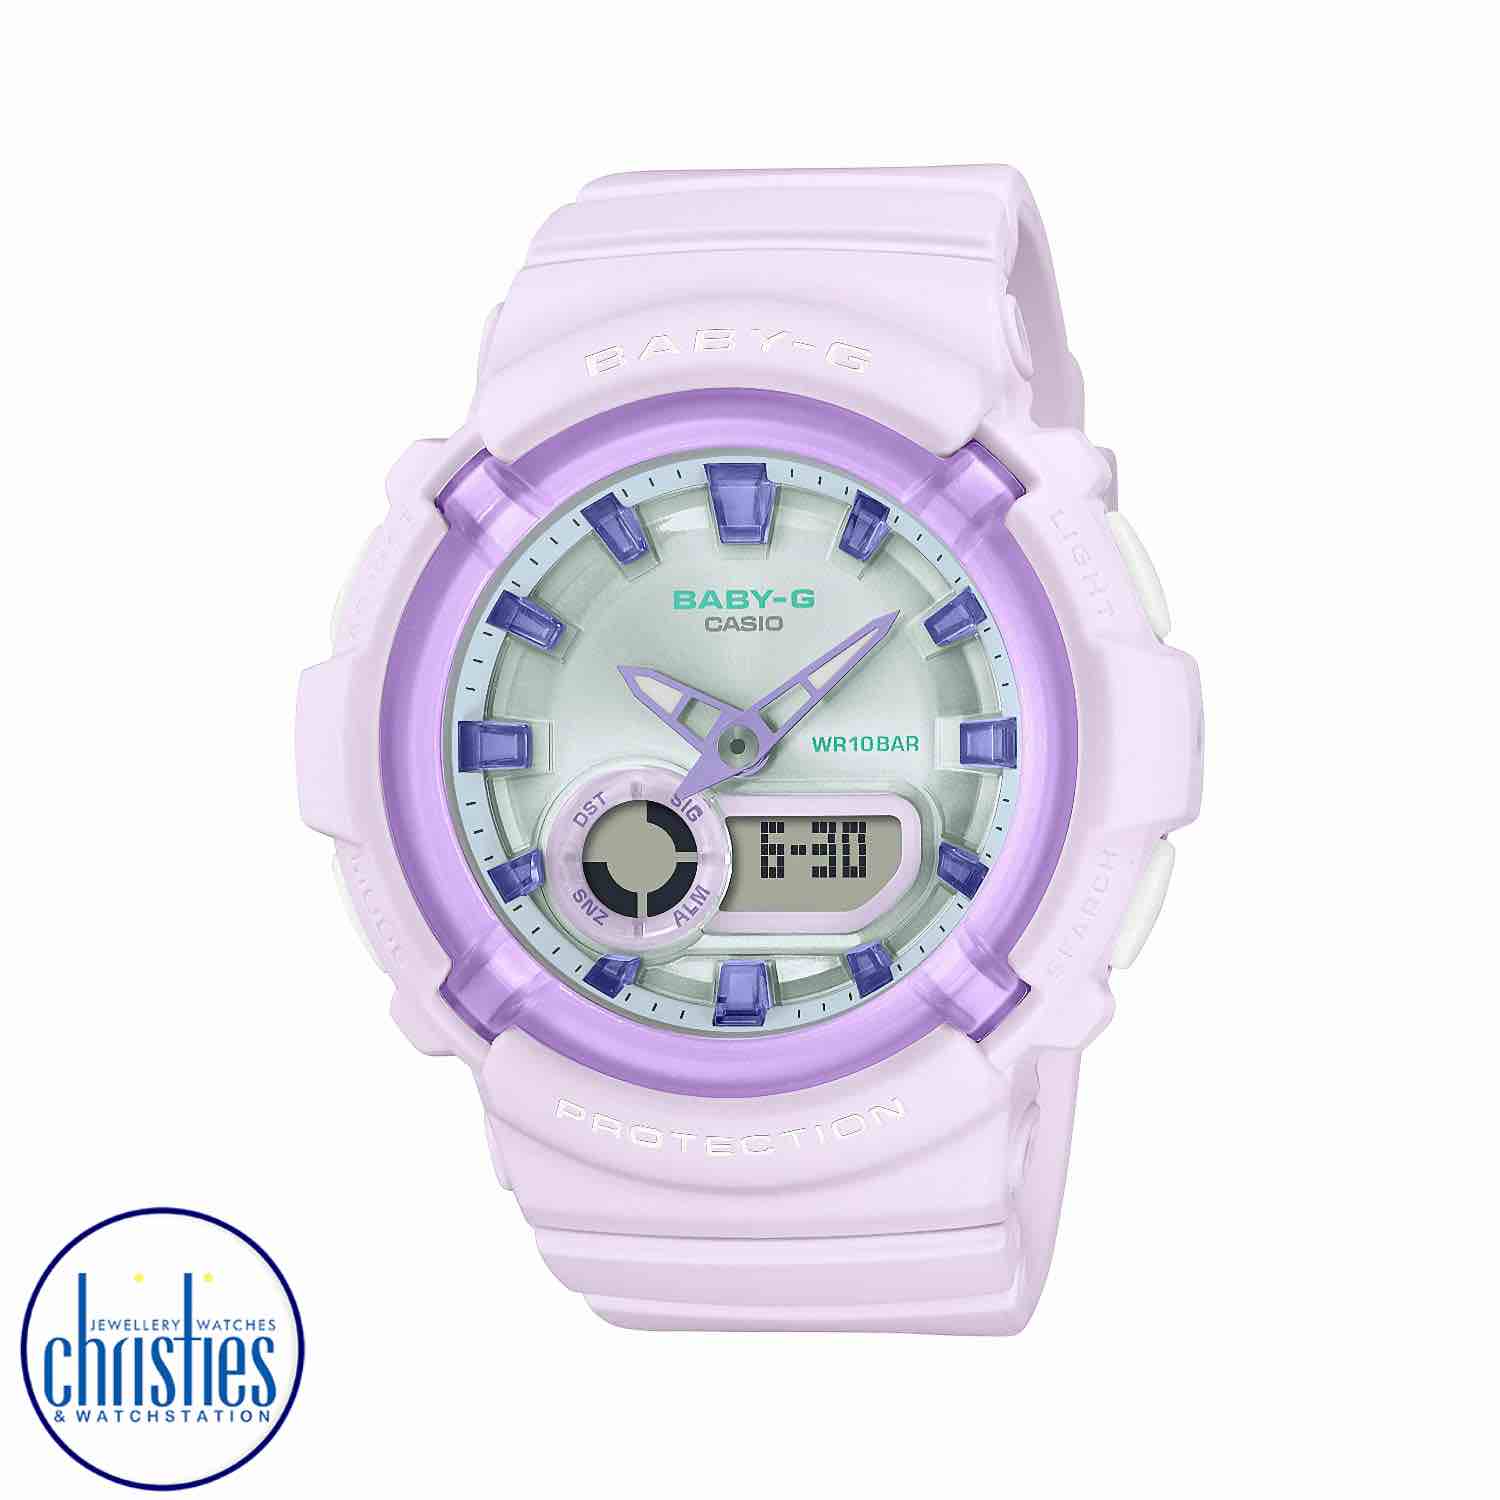 BGA280SW-6A Casio Baby-G Candy Colours Watch. Indulge your sweet tooth with a candy-coloured BABY-G watch. Baby-G watches price